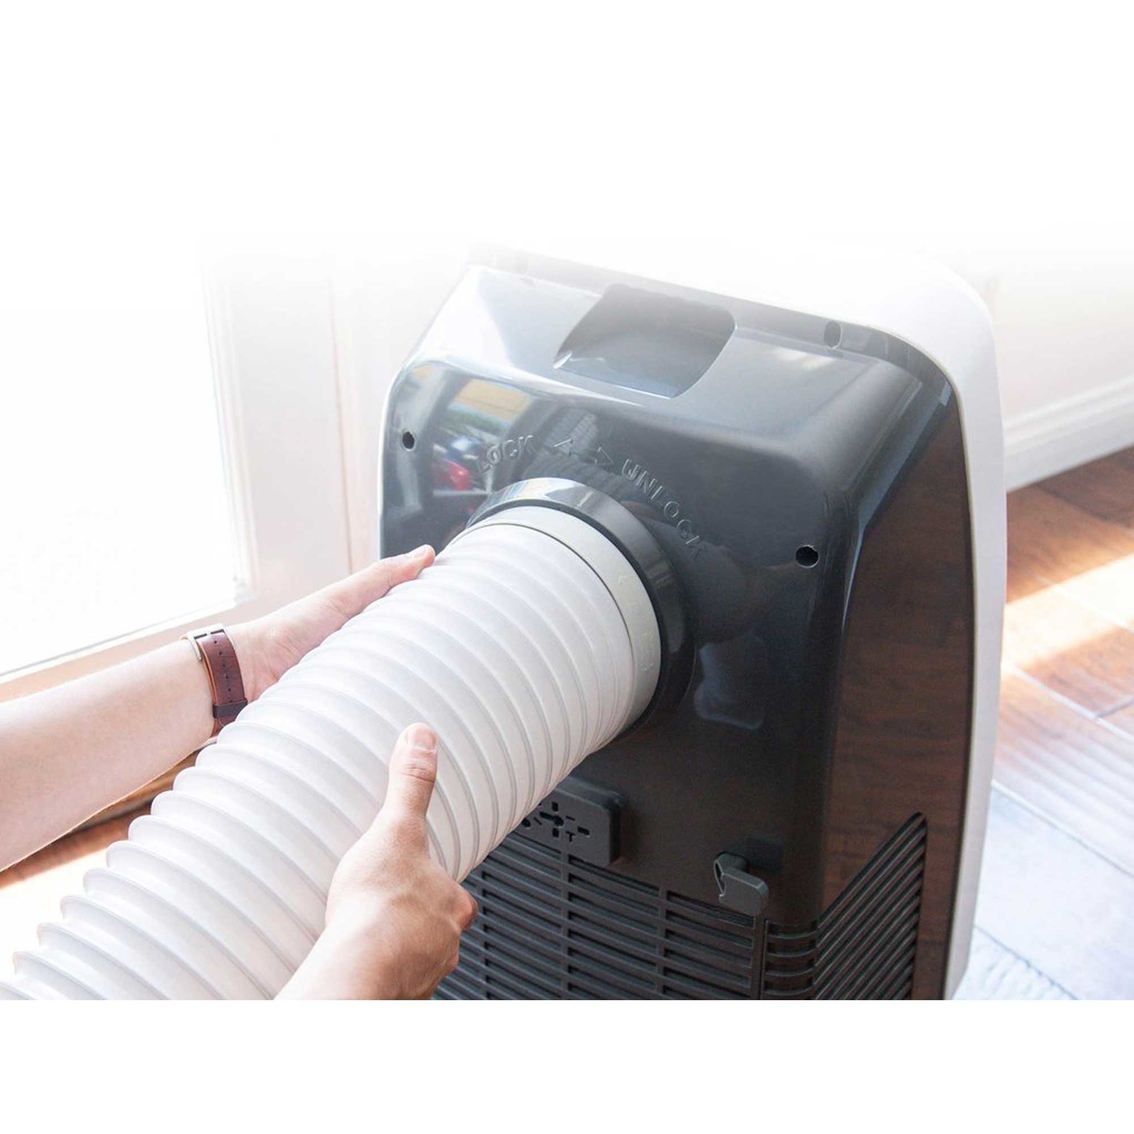 NewAir Compact 8,000 BTU Portable Air Conditioner - Image 7 of 10